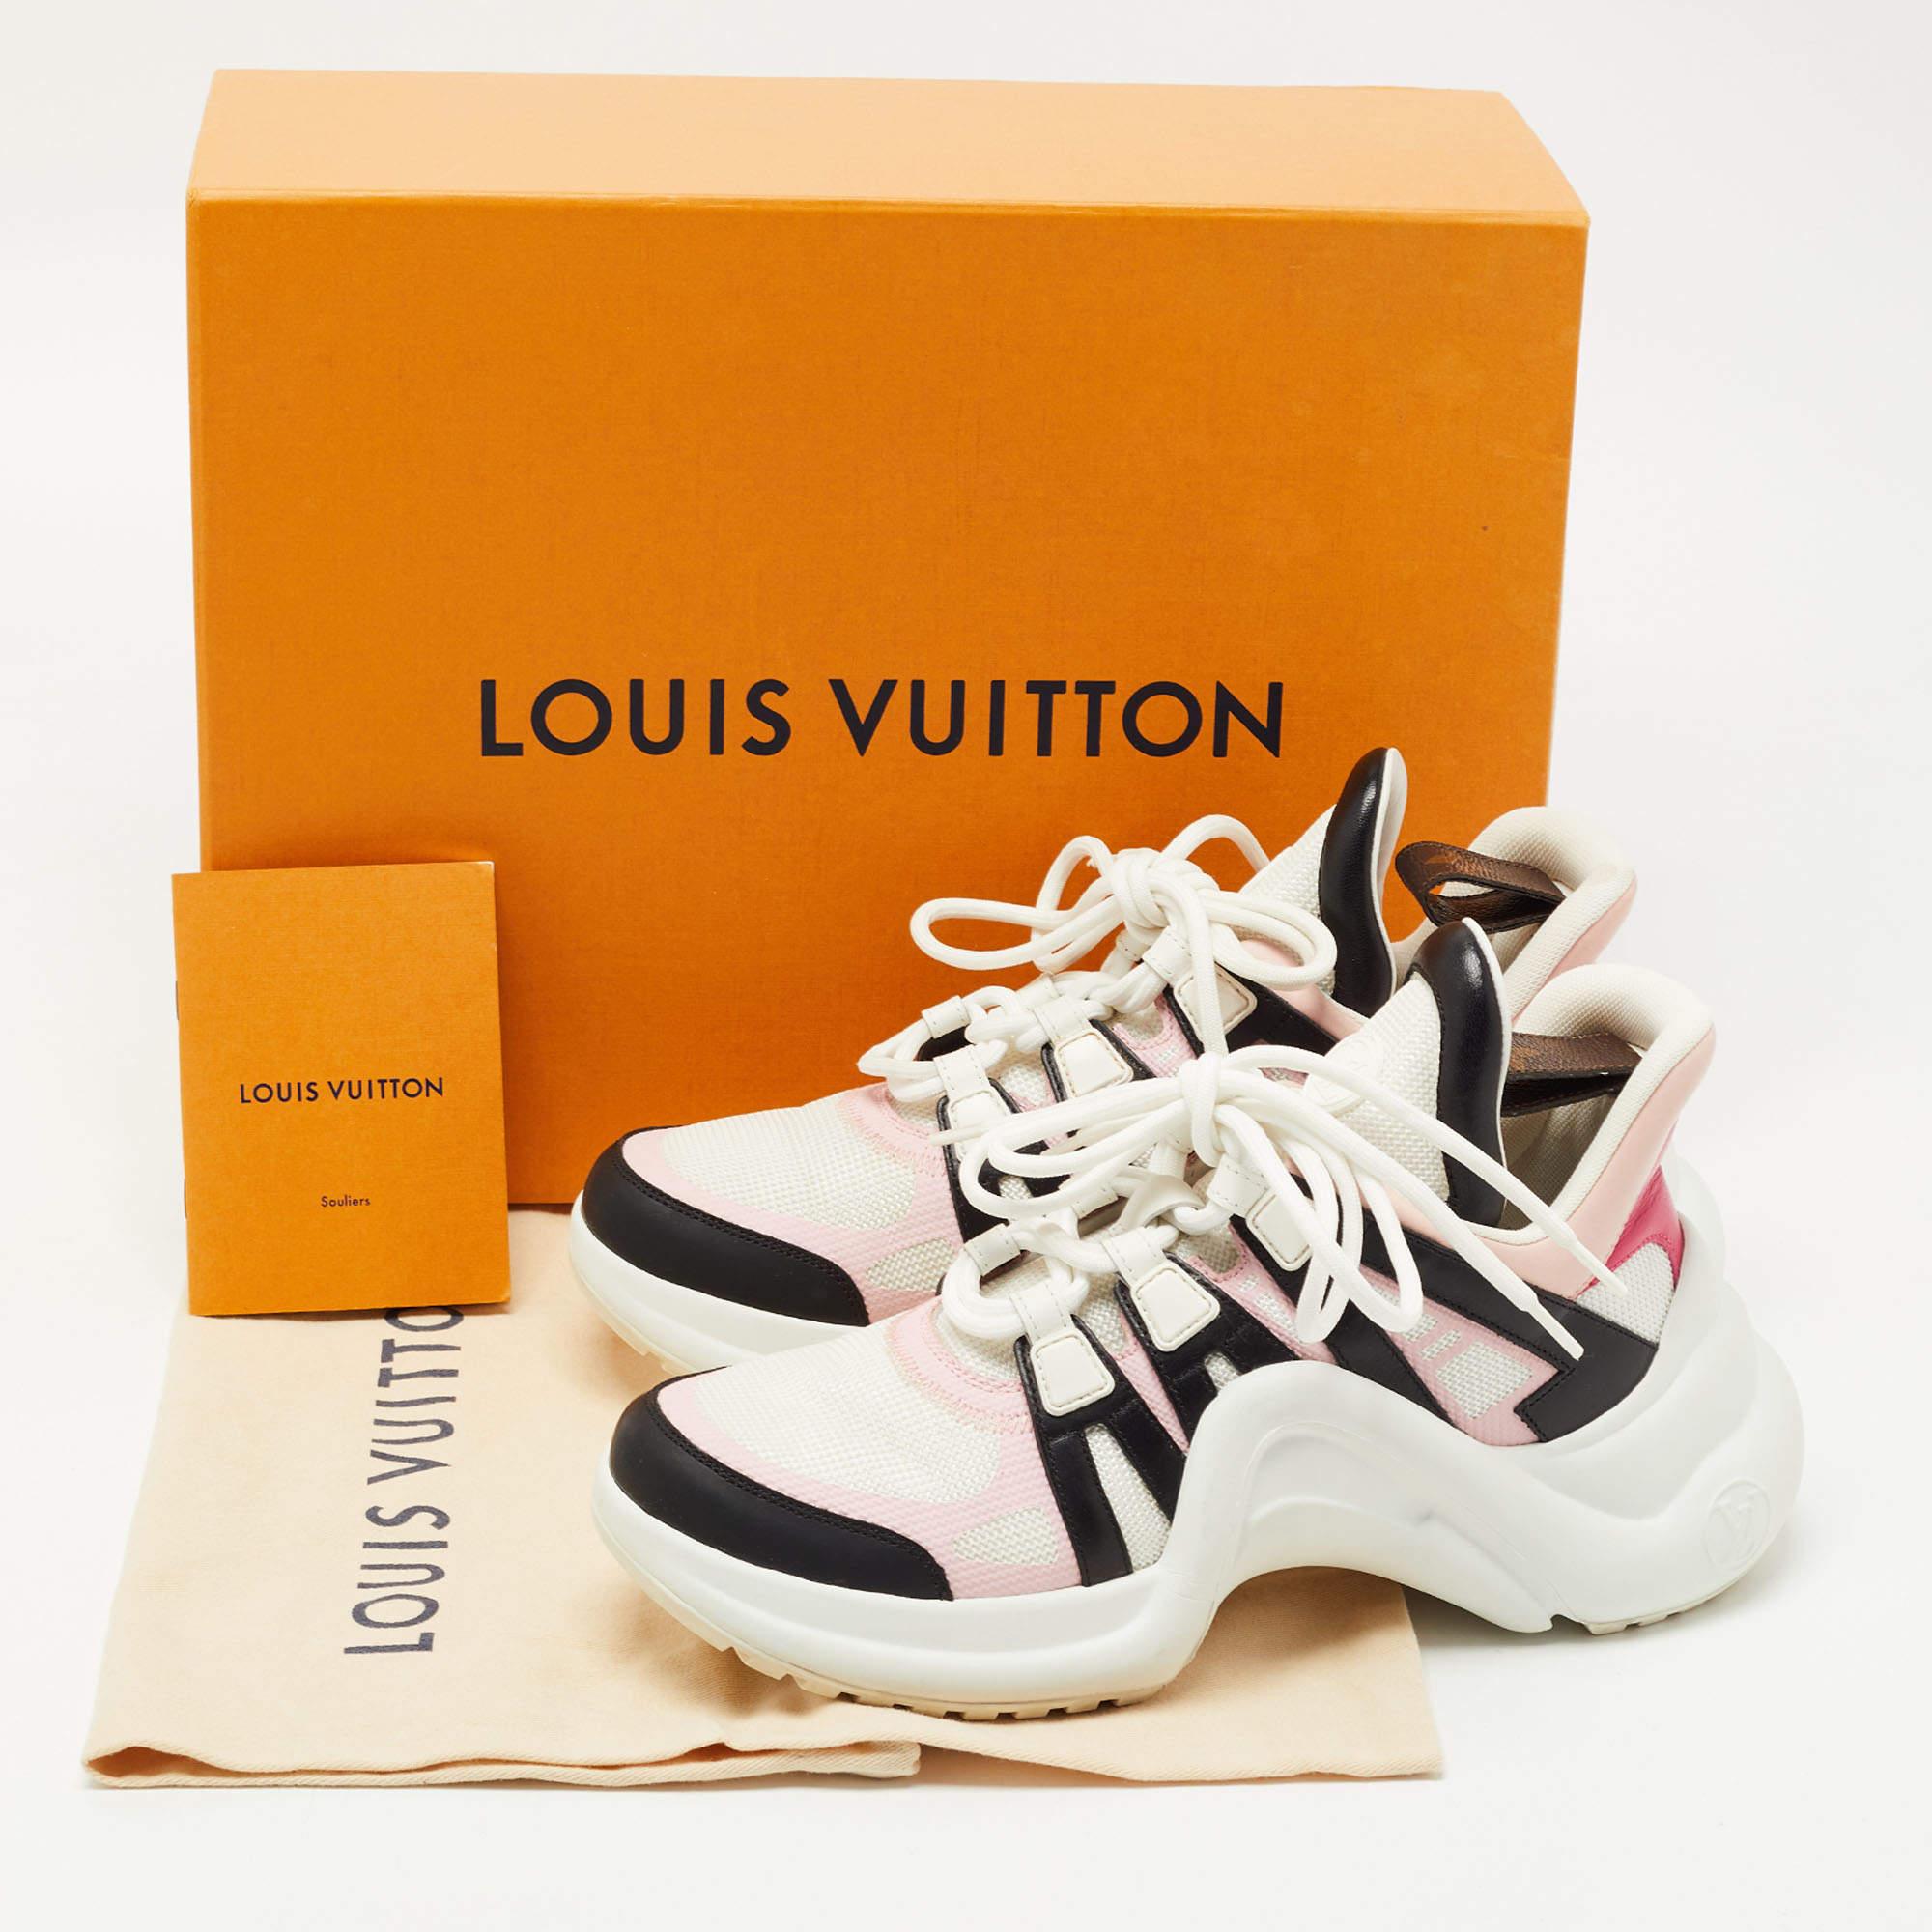 Louis Vuitton Multicolor Mesh and Leather Archlight Sneakers Size 37.5 2